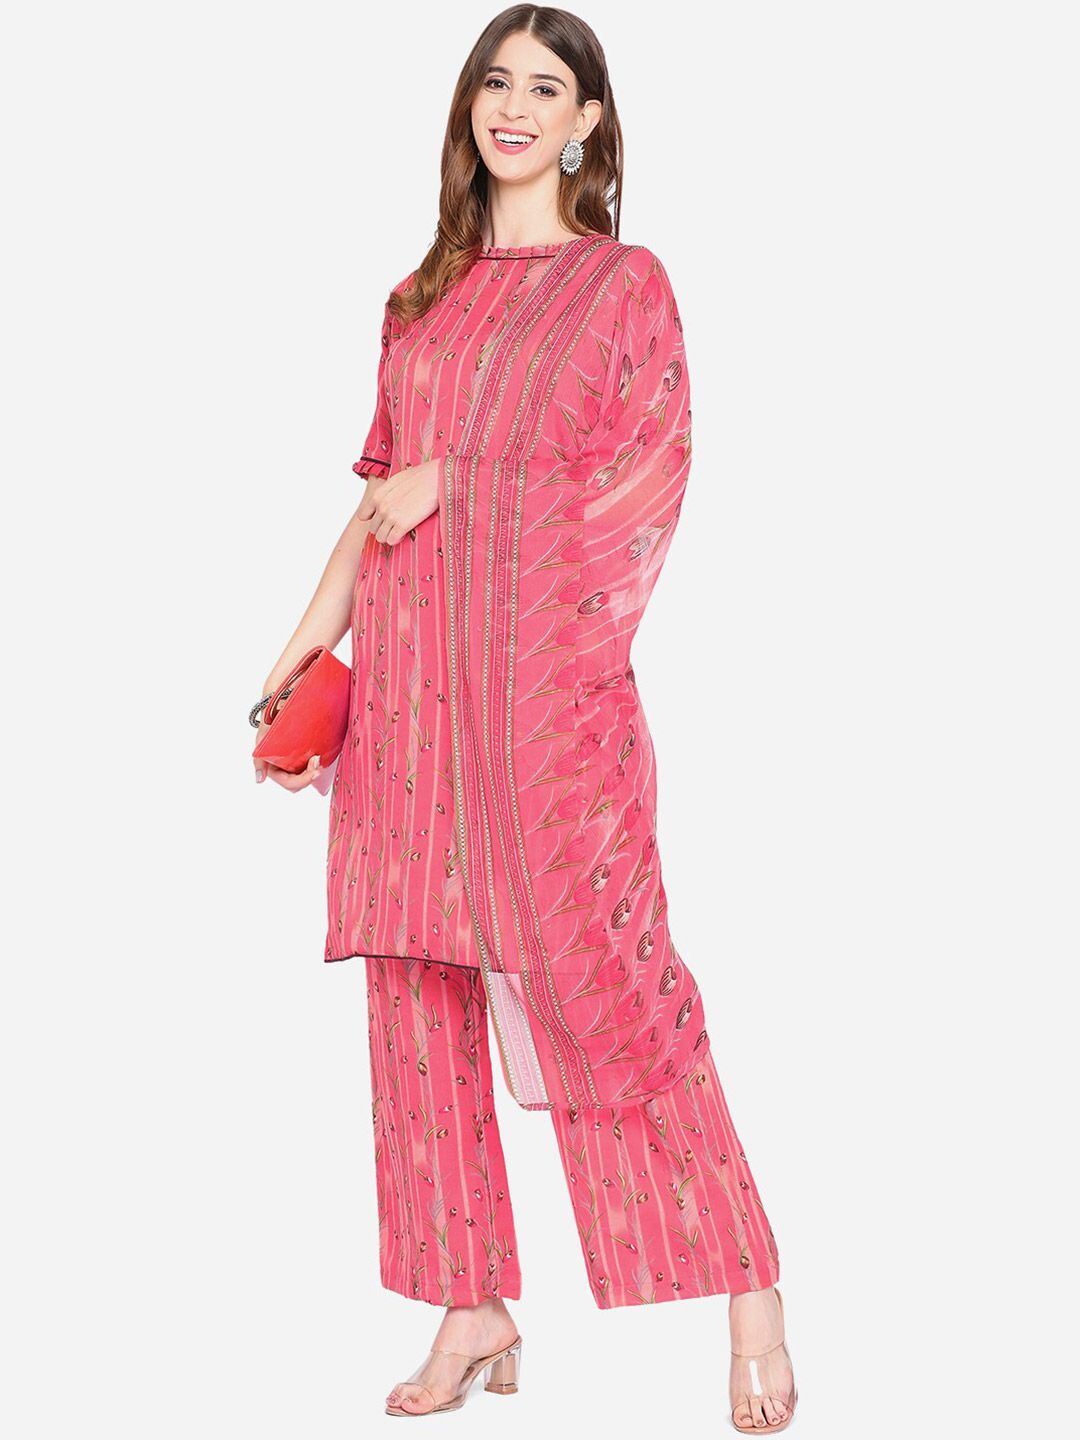 SHAVYA Pink Printed Unstitched Dress Material Price in India